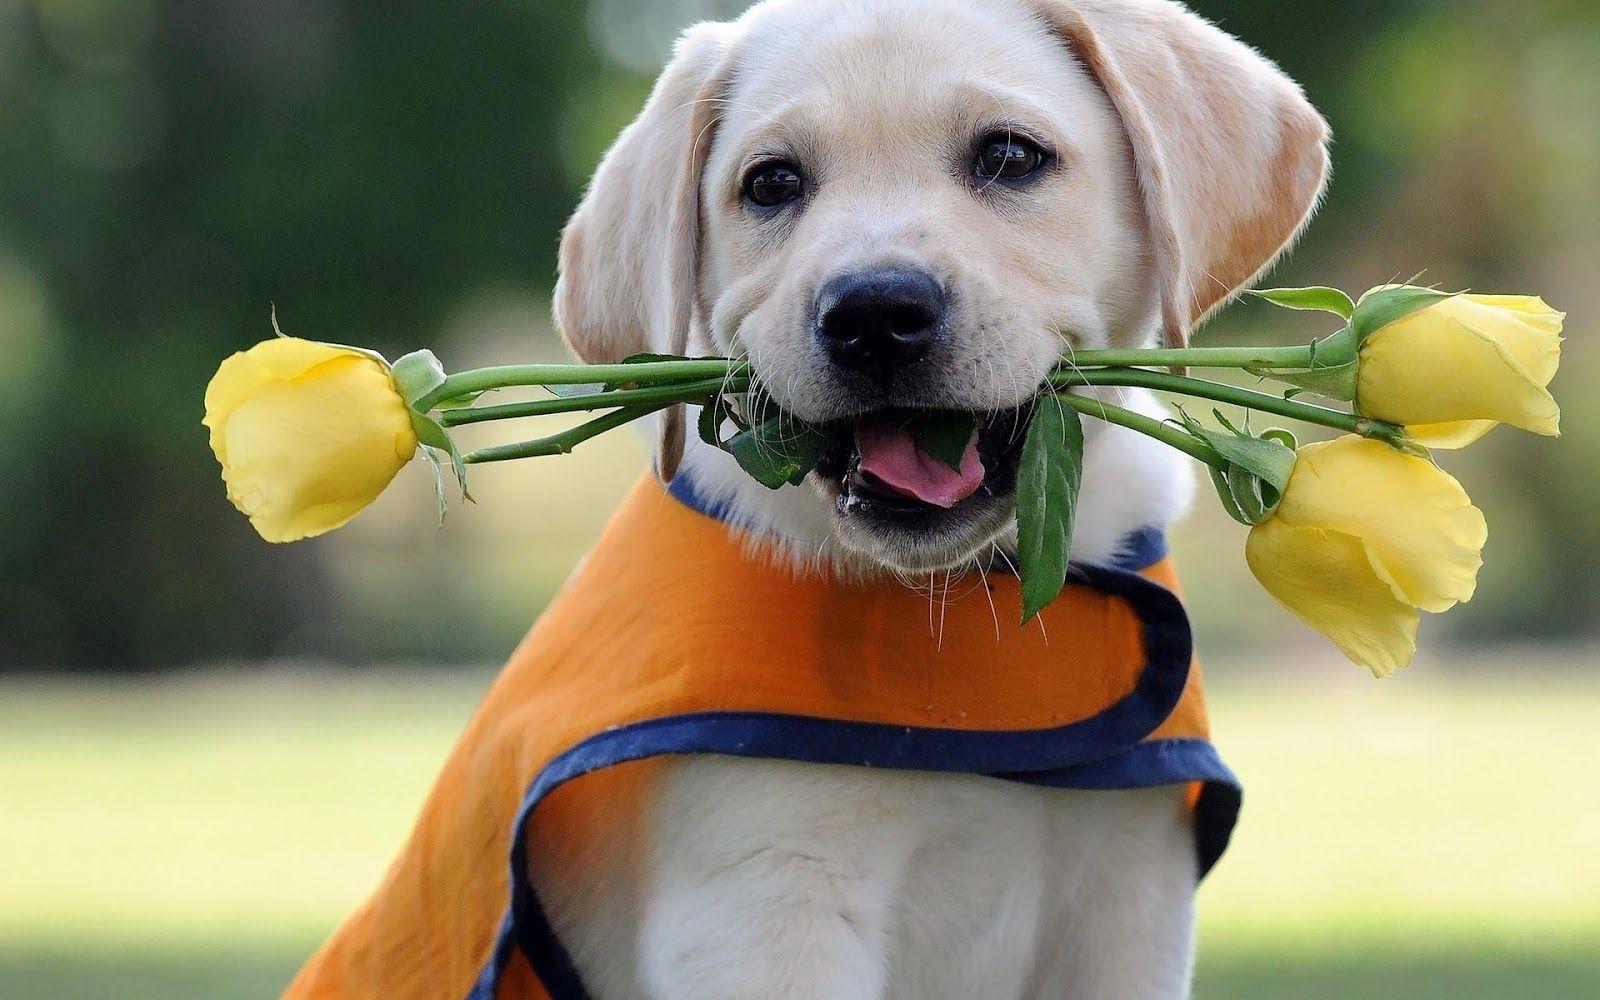 hd dog wallpaper with a flowers in mouth HD Wallpaper Free